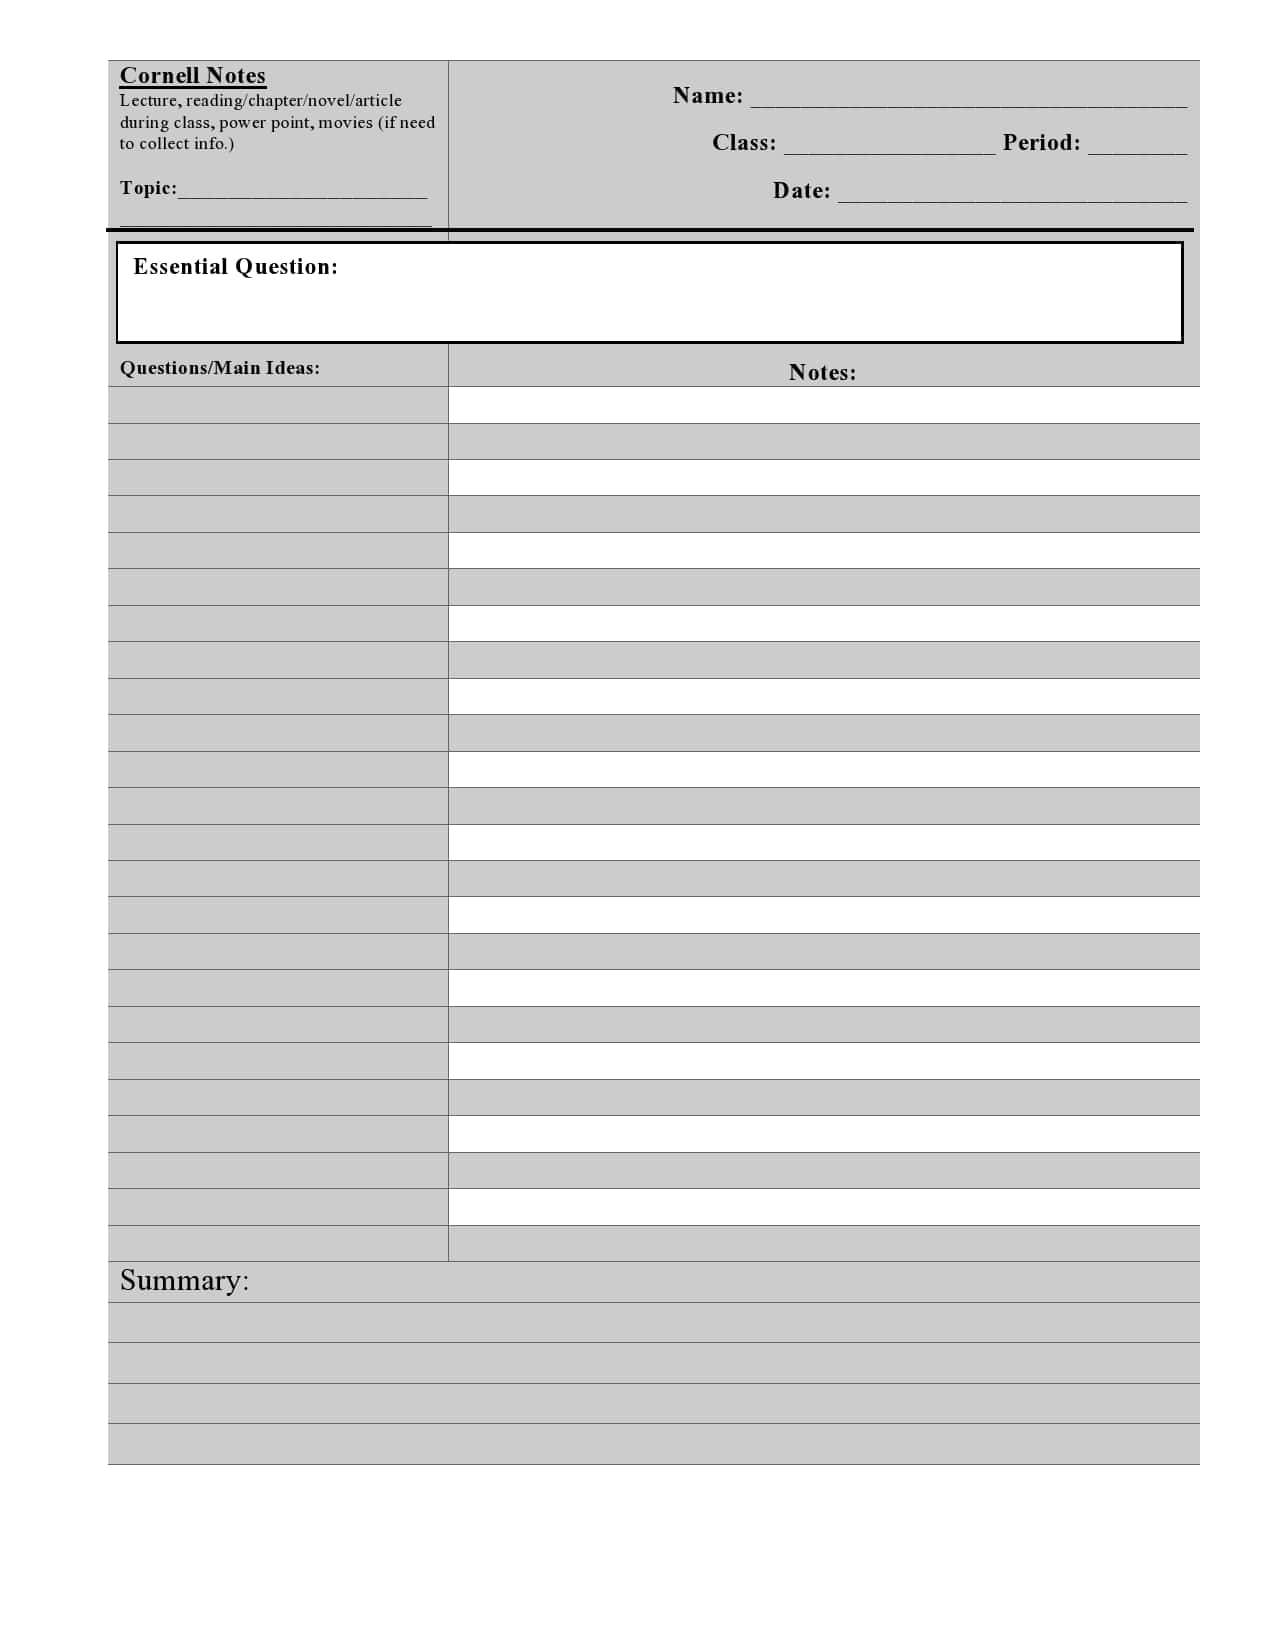 20 Printable Cornell Notes Templates [Free] - TemplateArchive Inside Lecture Note Template